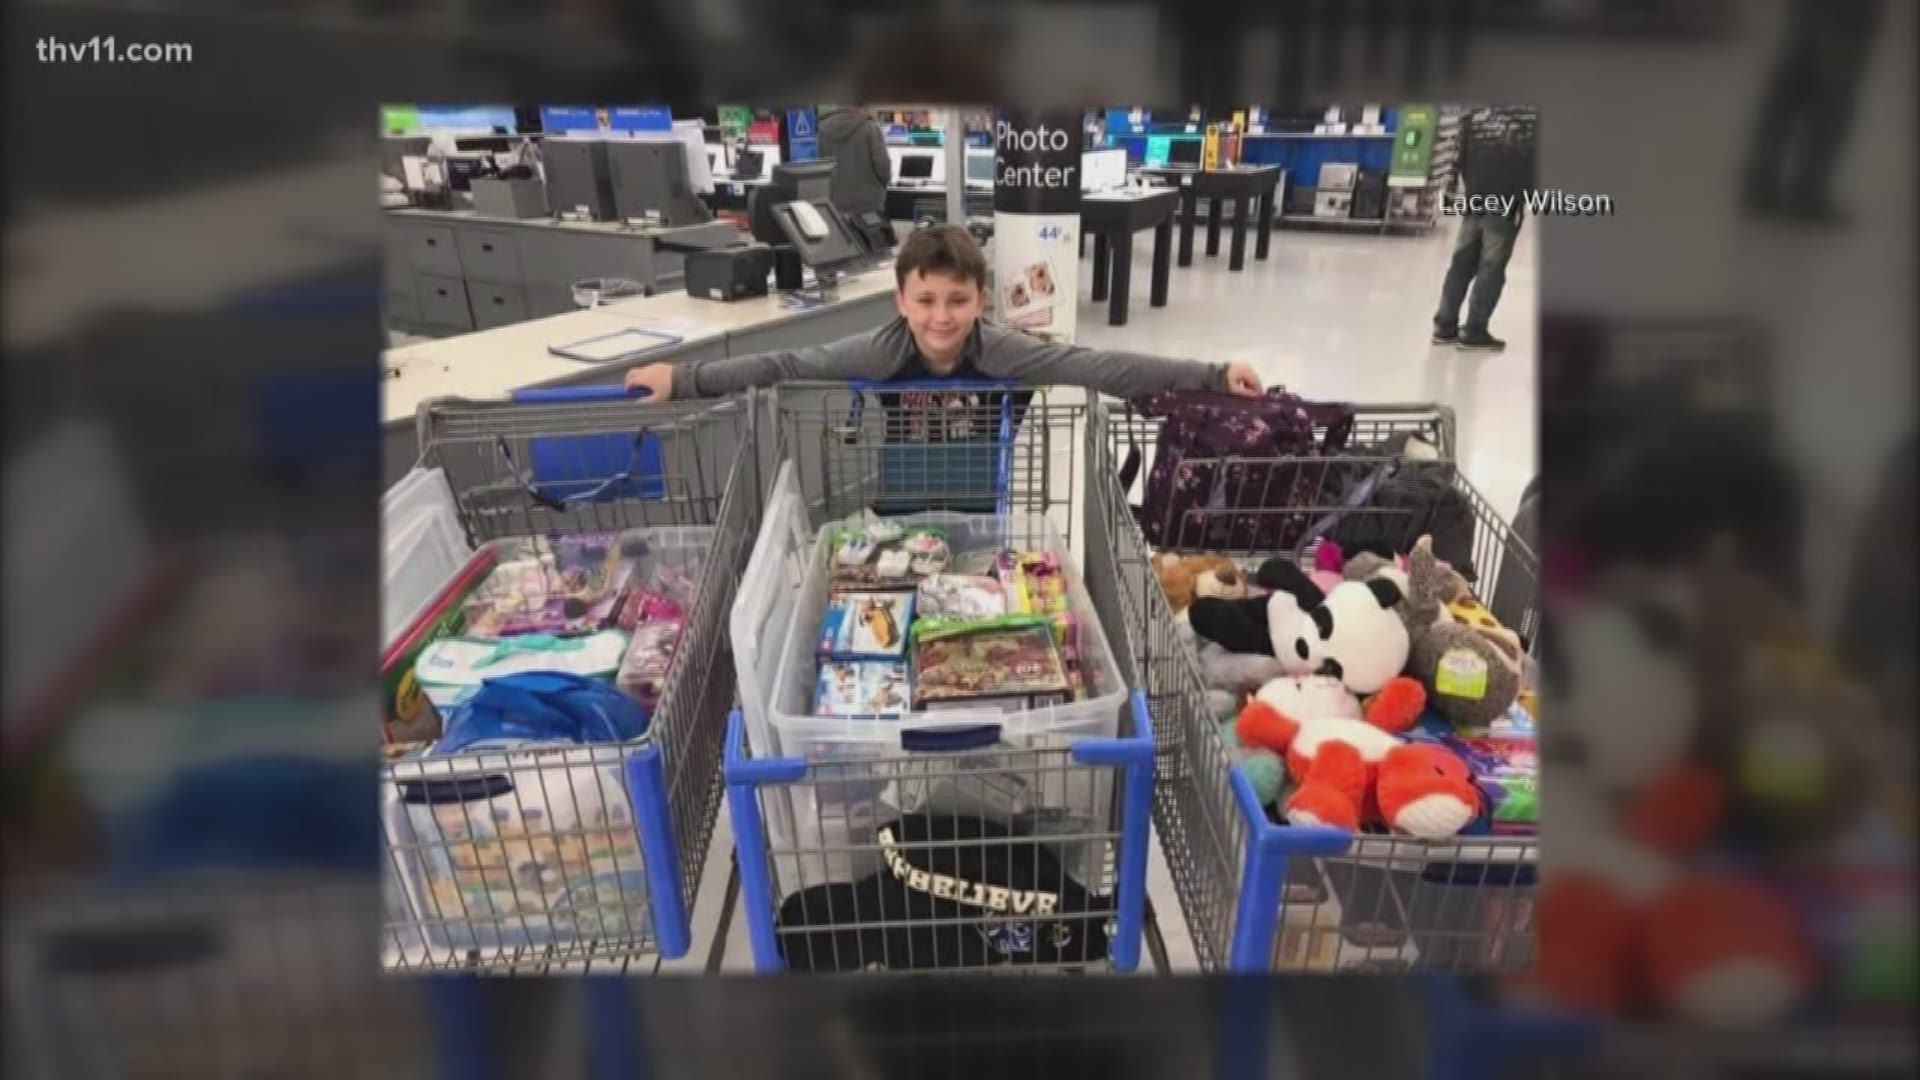 It's the season of giving and one Arkansas 10-year-old is the perfect example of the Christmas spirit